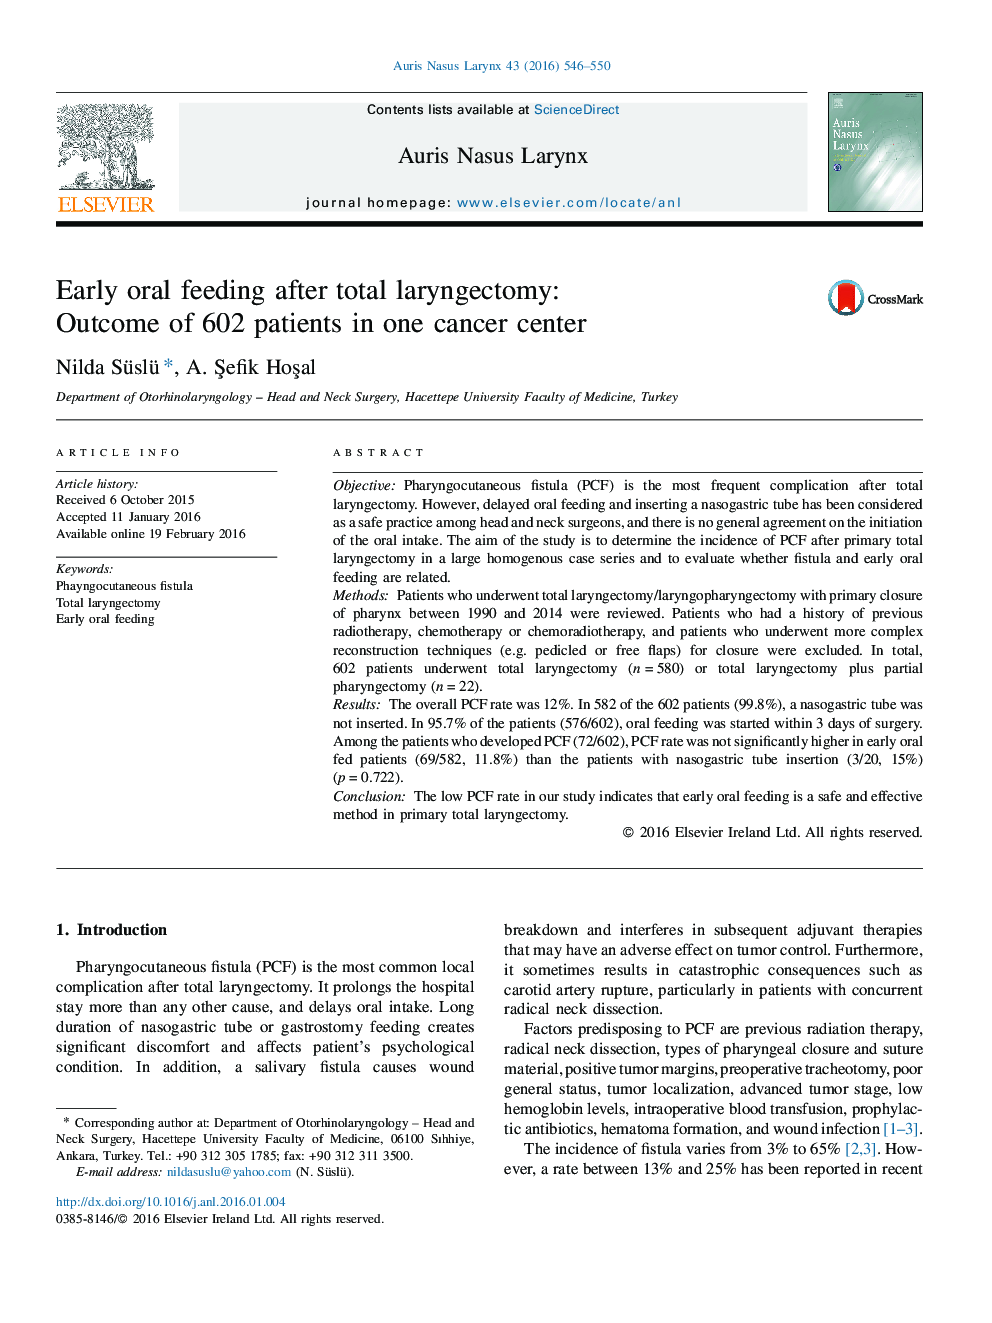 Early oral feeding after total laryngectomy: Outcome of 602 patients in one cancer center